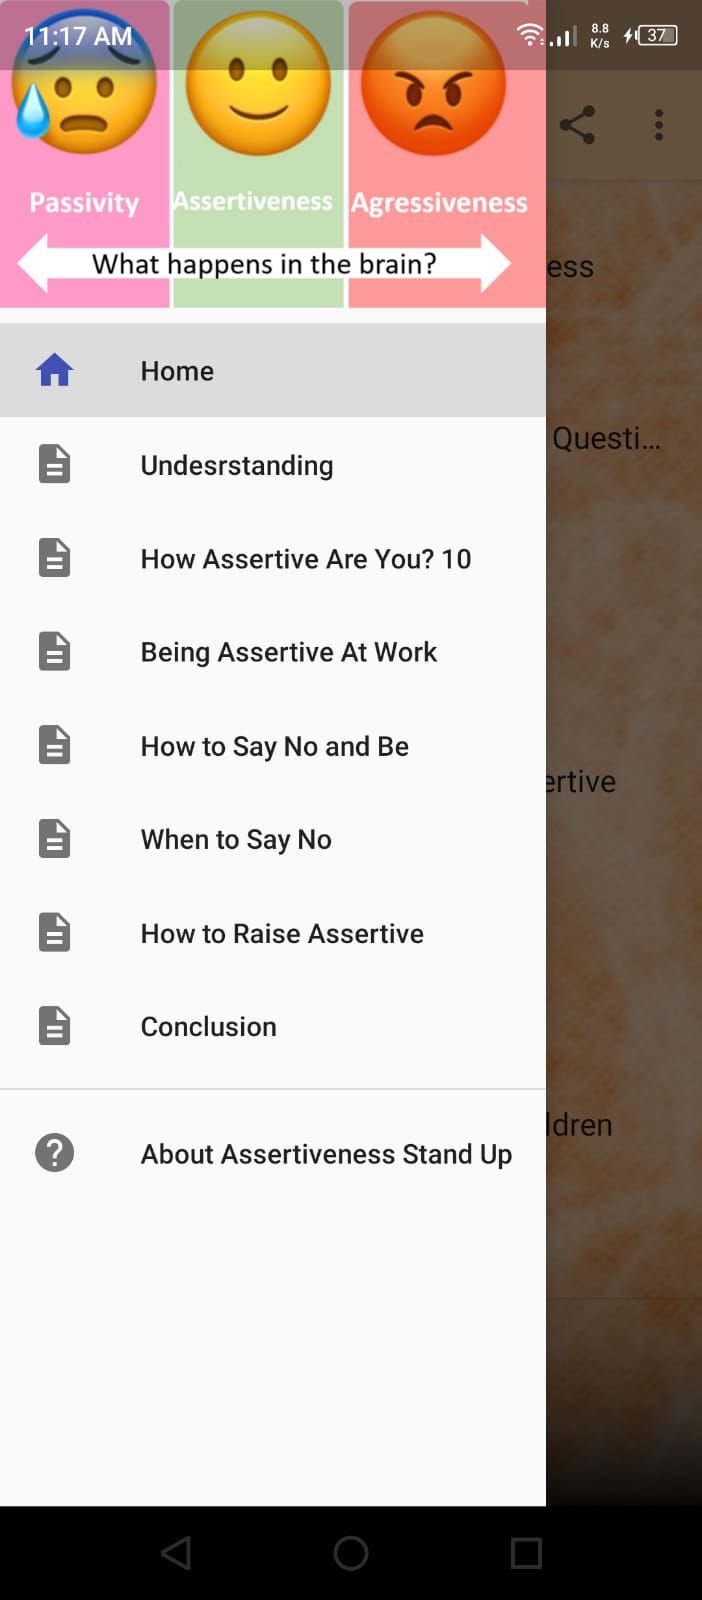 Assertiveness Stand-up Guide - Contents